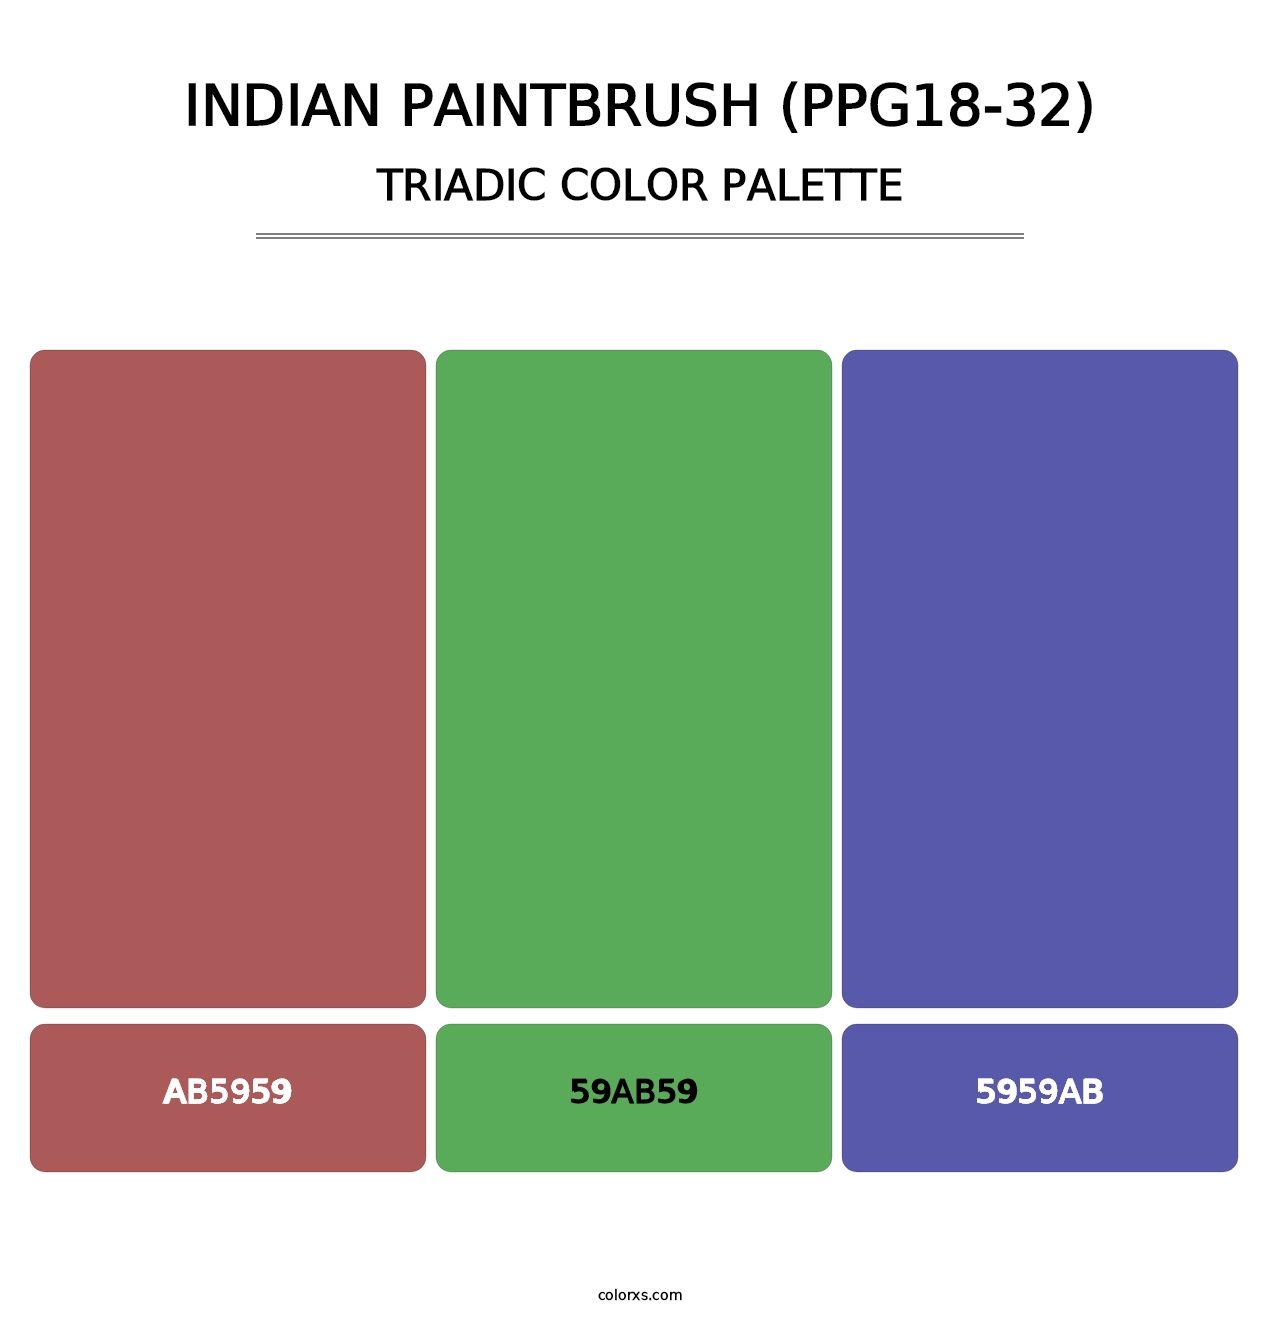 Indian Paintbrush (PPG18-32) - Triadic Color Palette